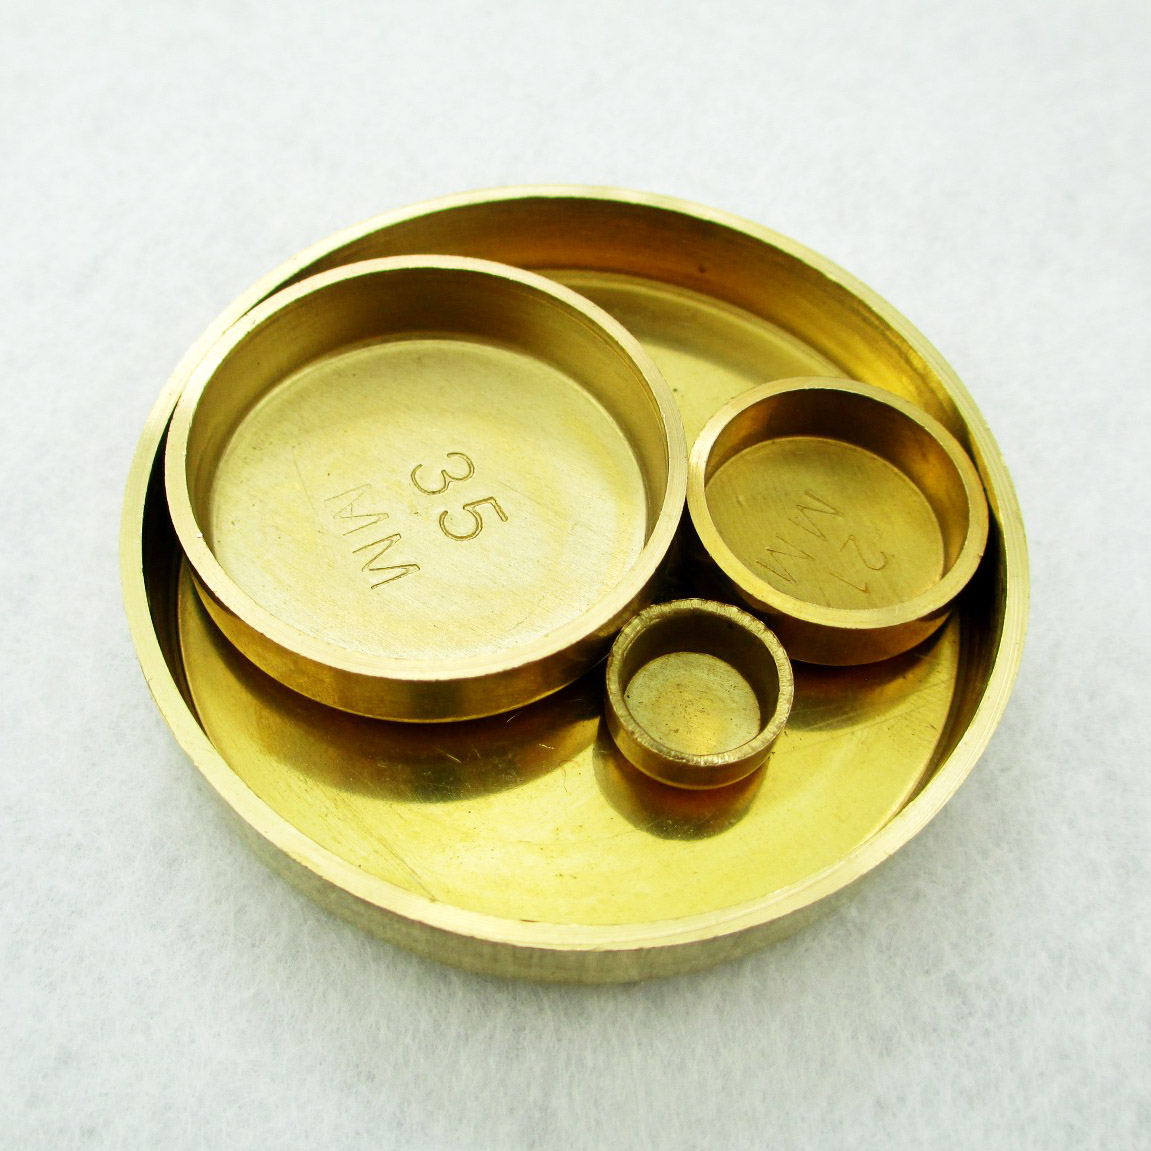 Tapered Threaded Flanged Metric Cap Plugs